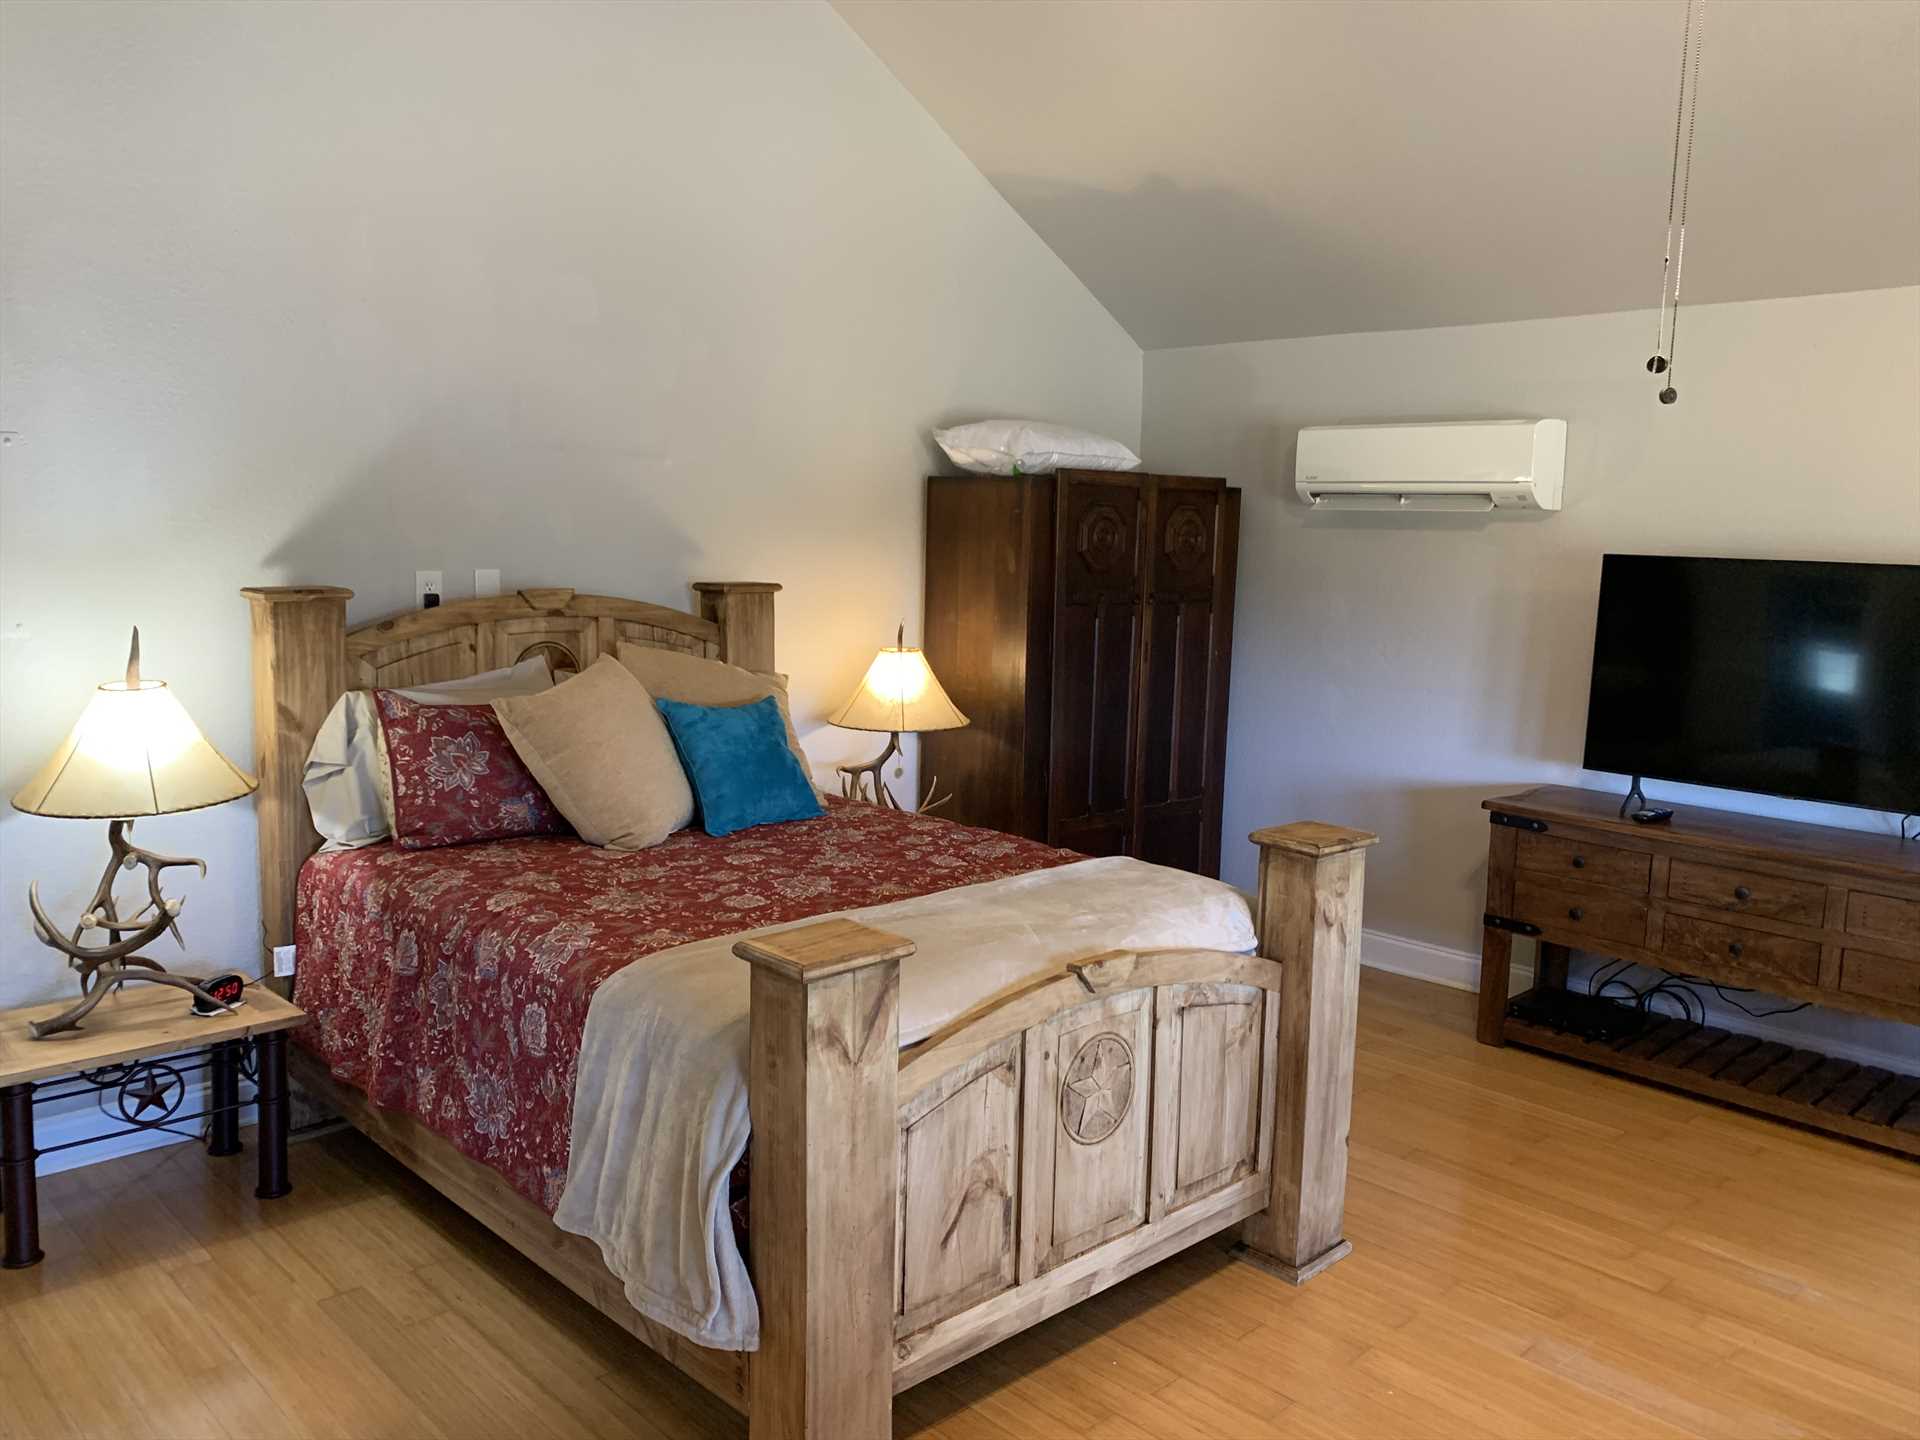                                                 The handsome woodwork at the head and foot of the big queen bed highlight where you'll enjoy restful sleep. Bed and bath linens are provided, too!